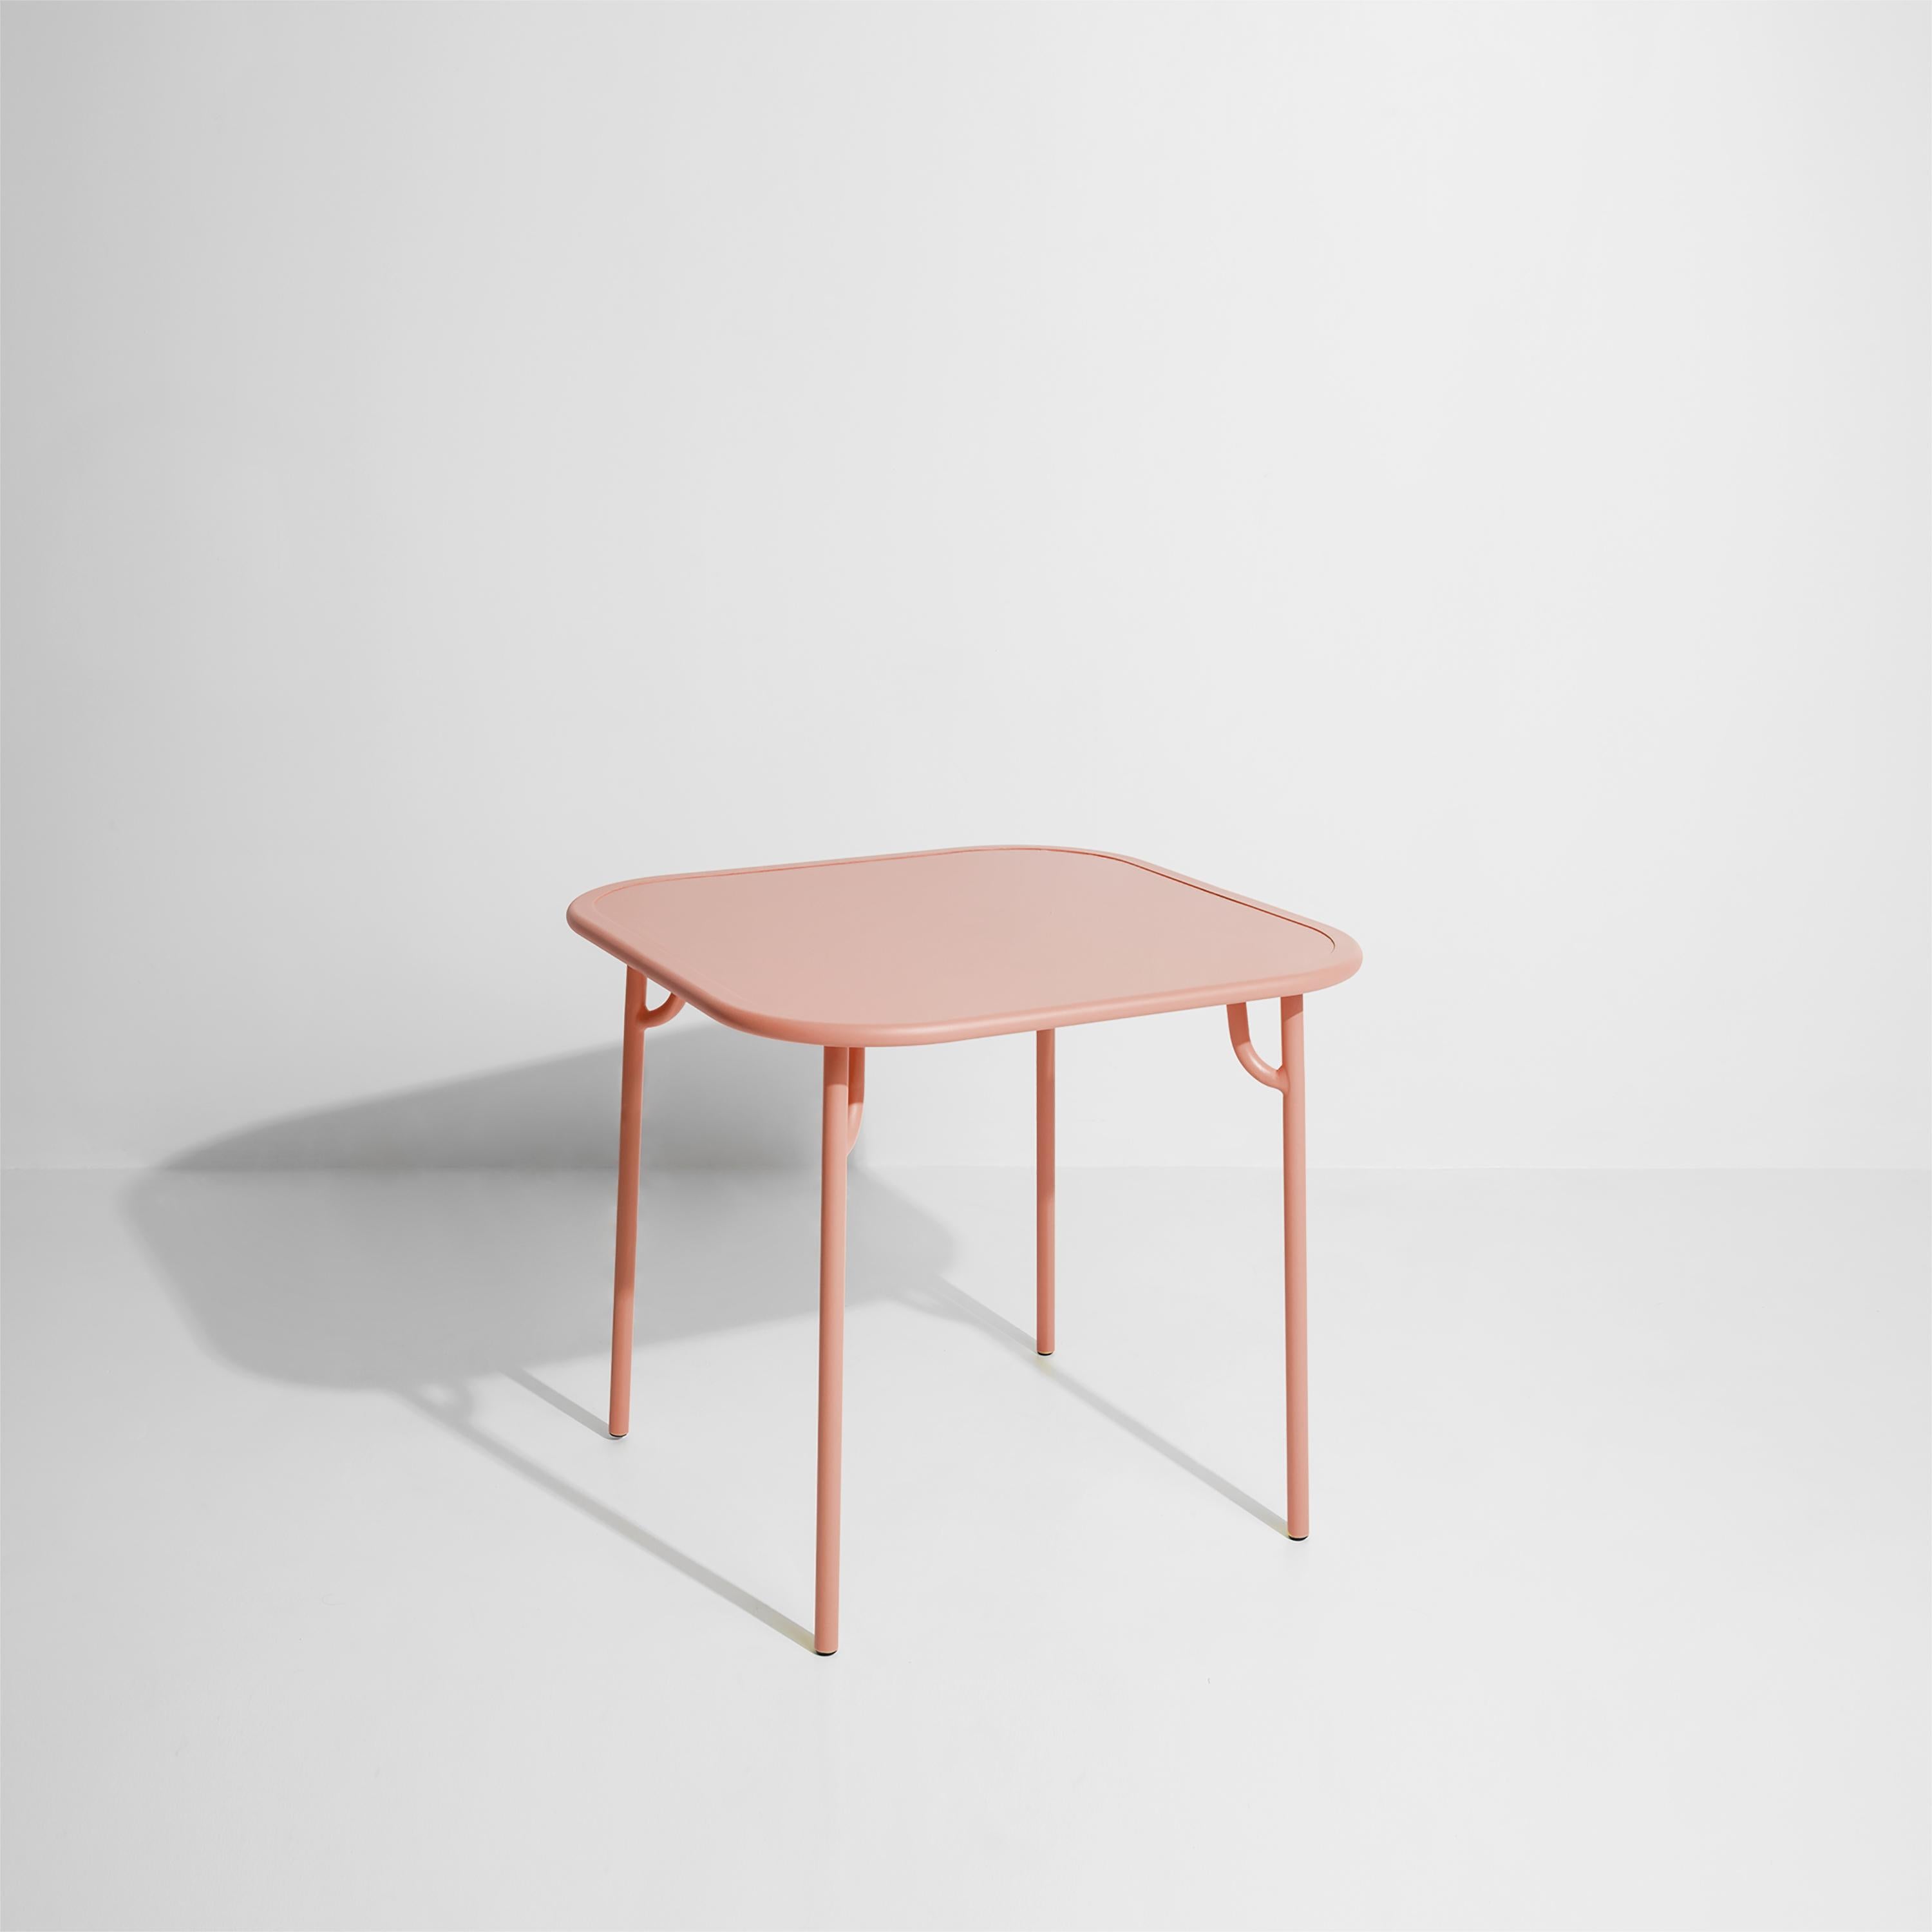 Petite Friture Week-End Plain Square Dining Table in Blush Aluminium by Studio BrichetZiegler, 2017

The week-end collection is a full range of outdoor furniture, in aluminium grained epoxy paint, matt finish, that includes 18 functions and 8